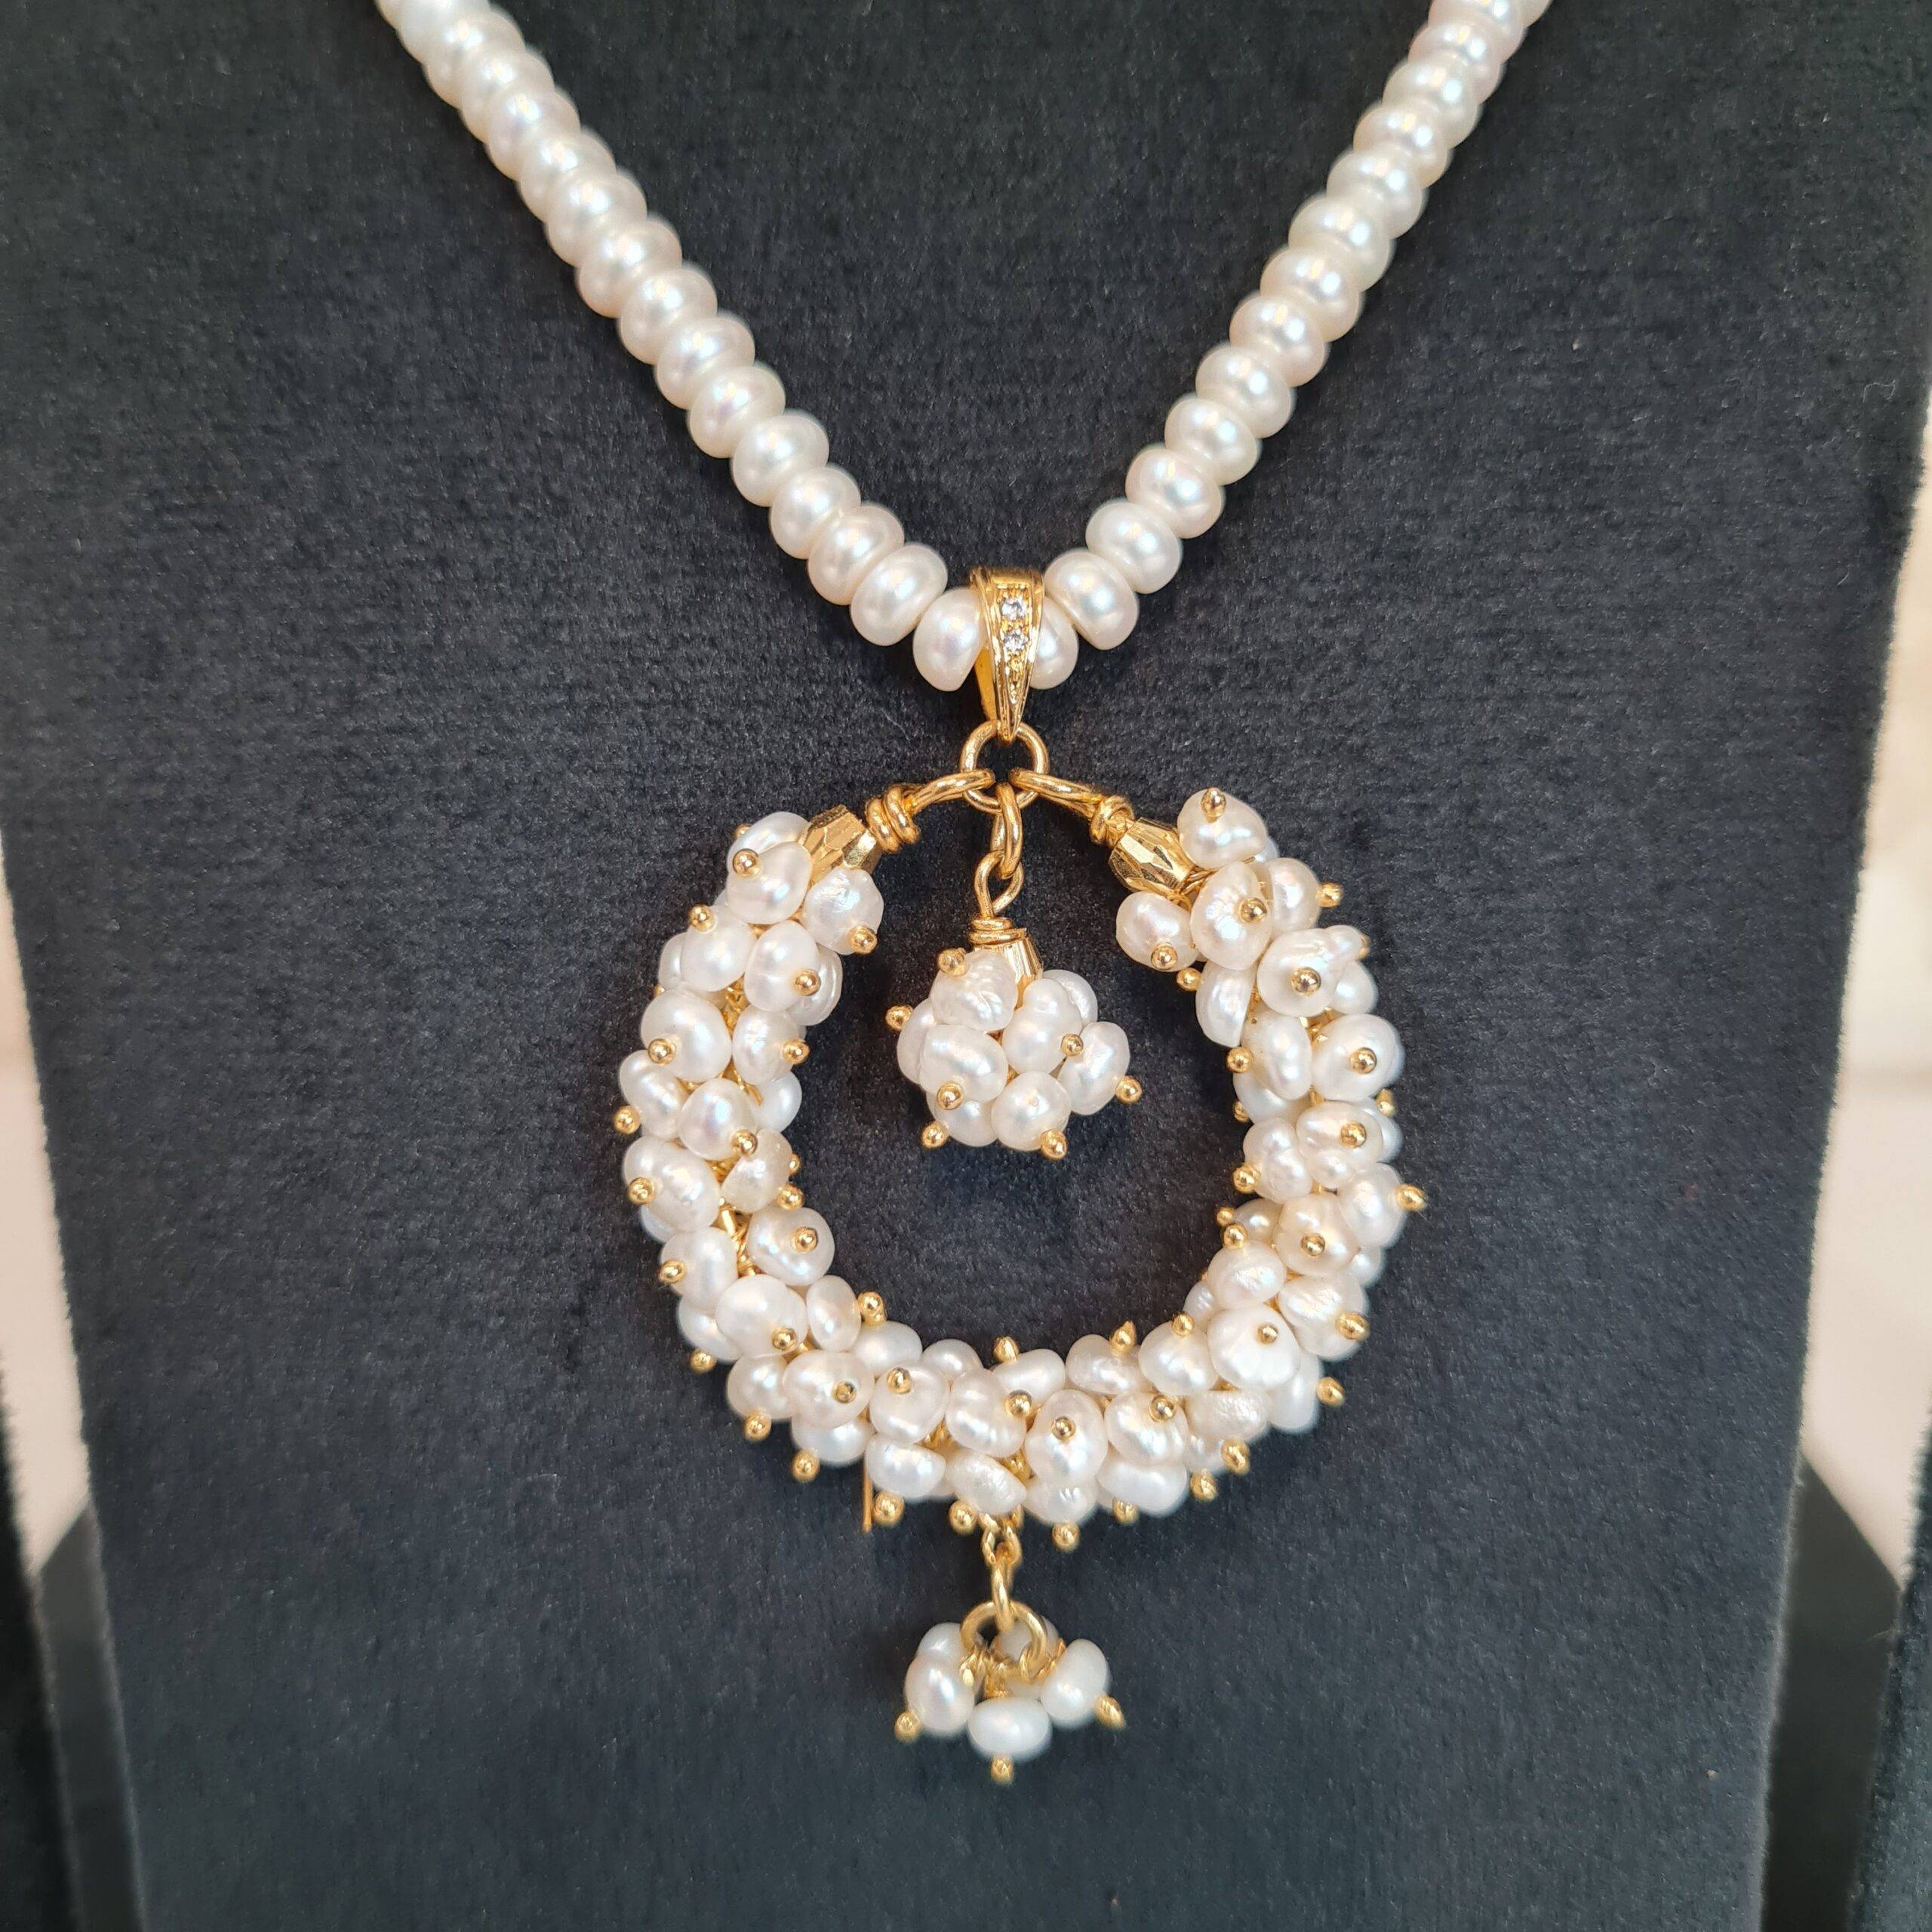 Antique Edwardian Era 9 Carat Gold Peridot and Seed Pearl Necklace –  Imperial Jewellery